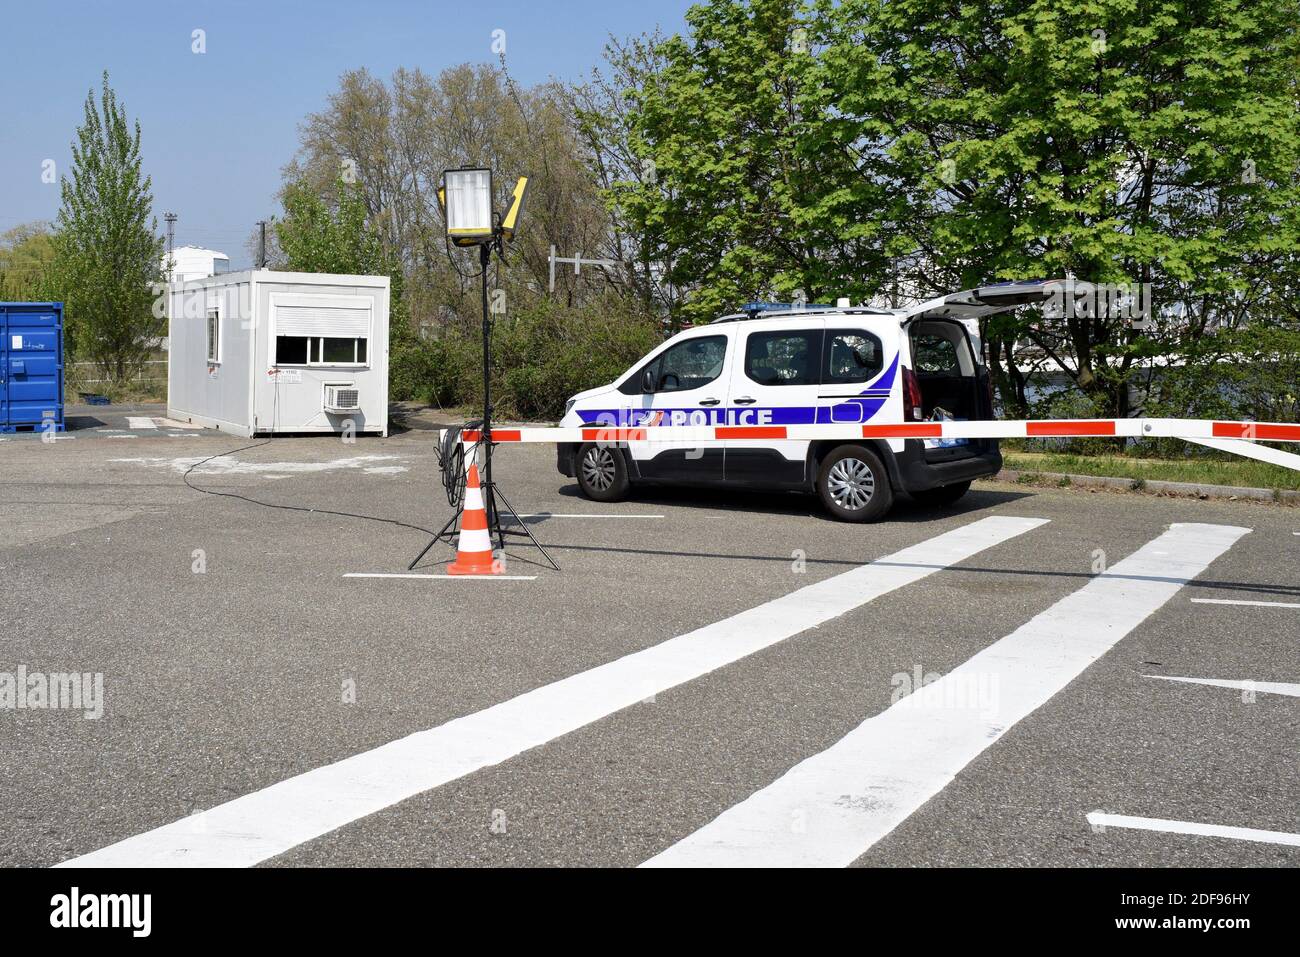 Franco German Border On The Rhine Is Closed At The Bridge Of Europe French And German Border Police Filter The Crossings Only A Work Certificate Or Proof Of Residence Is Required To Cross The Border On April 10 2020 In Strasbourg Northeastern France Kehl Germany Photo By Nicolas Rosesabacapresscom 2DF96HY 